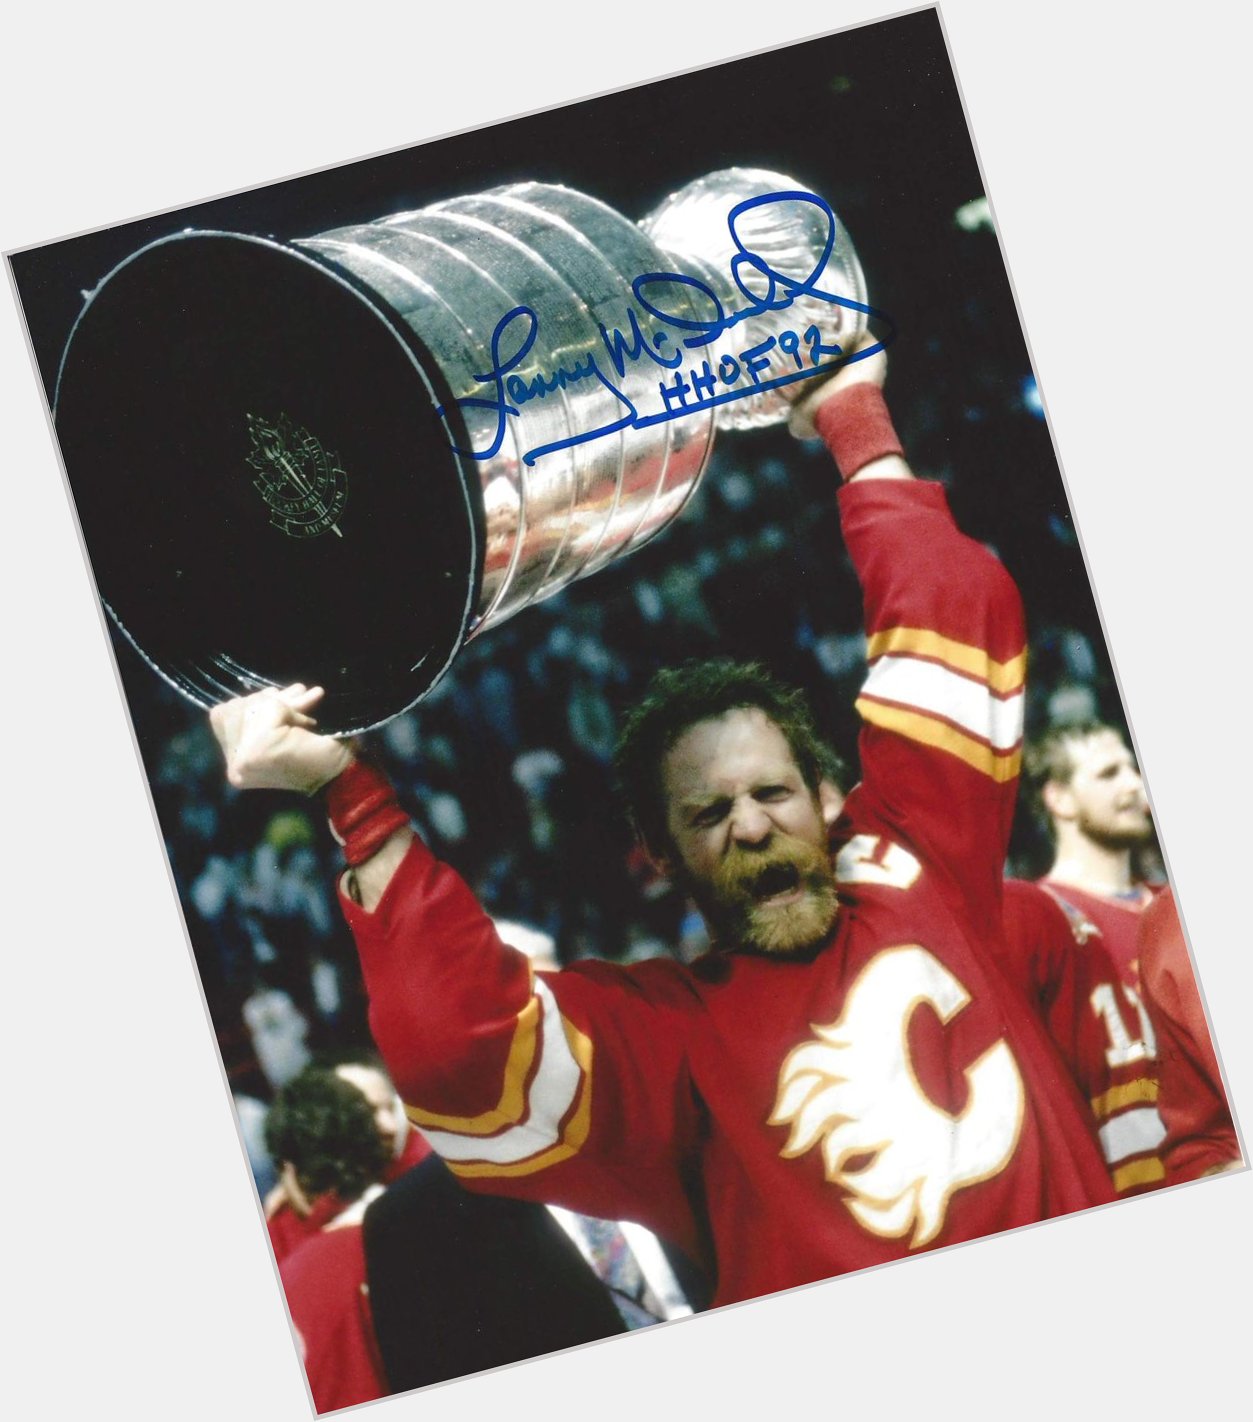 Happy Birthday Lanny McDonald, one of the greatest players in the NHL! 